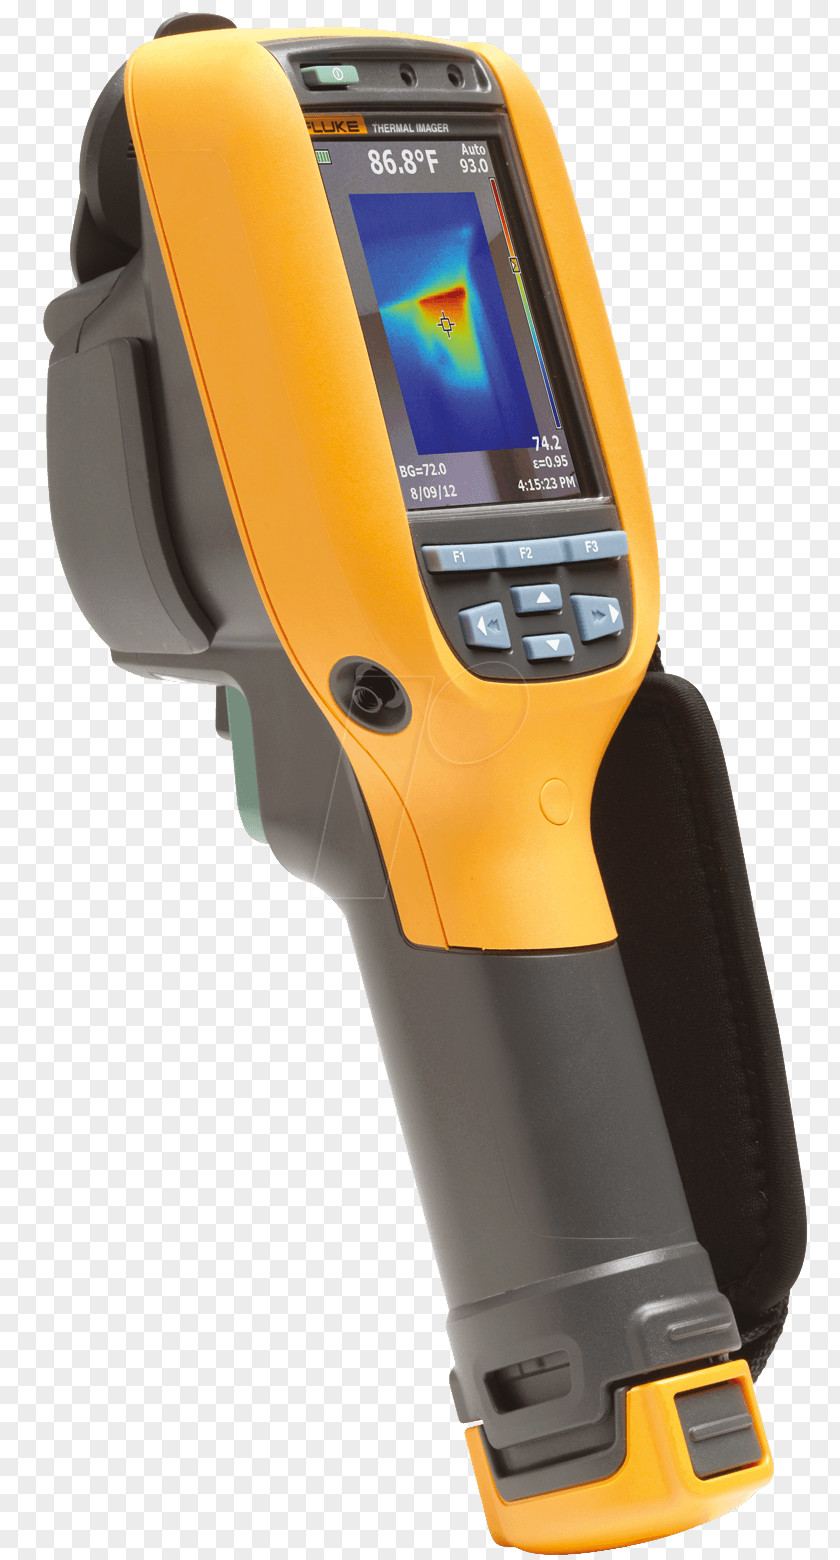 Camera Thermographic Thermography Fluke Corporation Thermal Imaging PNG